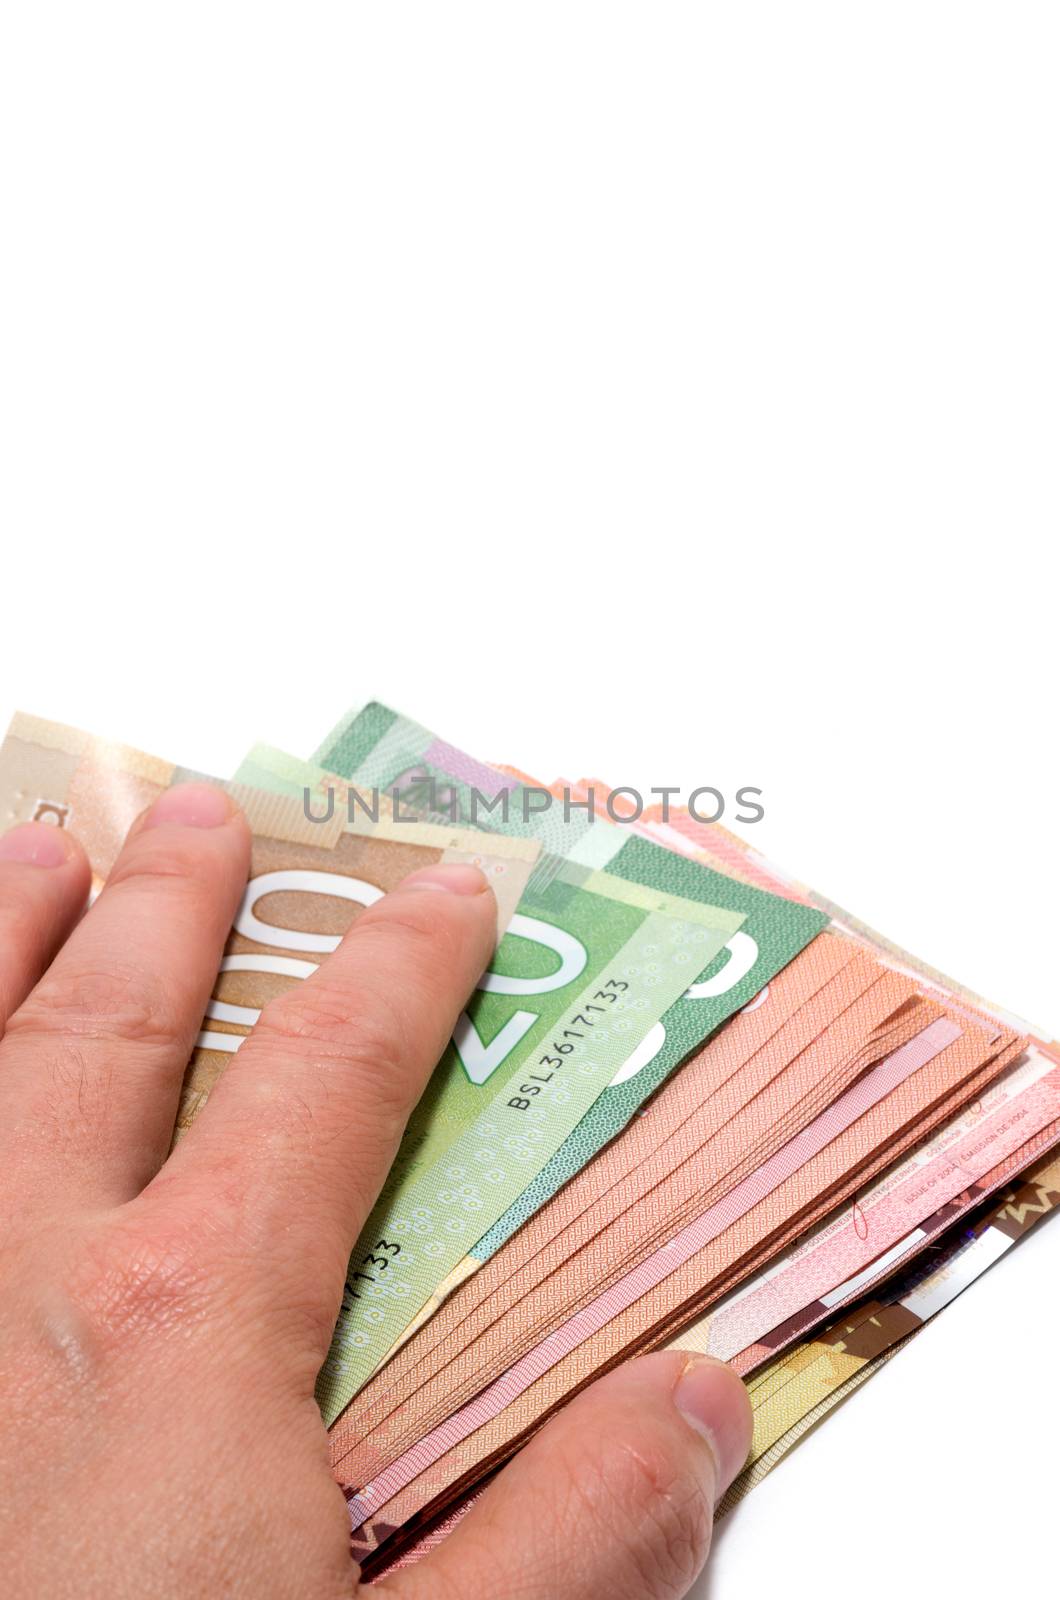 Hand hiding the stash of Canadian banknotes by daoleduc